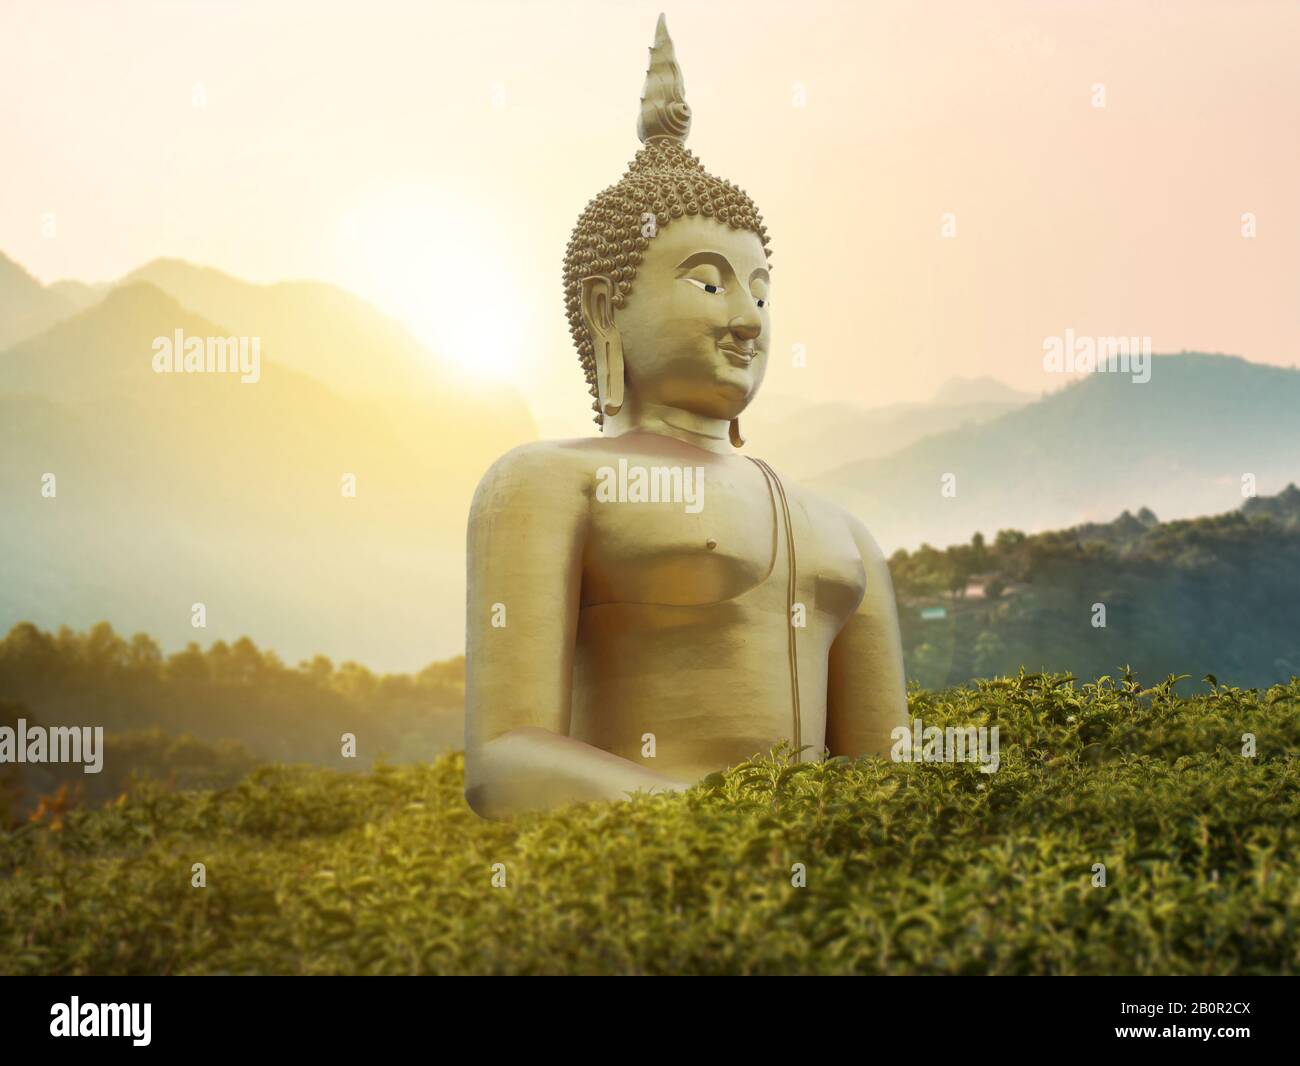 big great powerful Buddha statue in gold color in the middle of green park on the mountain with beautiful sunset or sunrise and wonderful nature scene Stock Photo